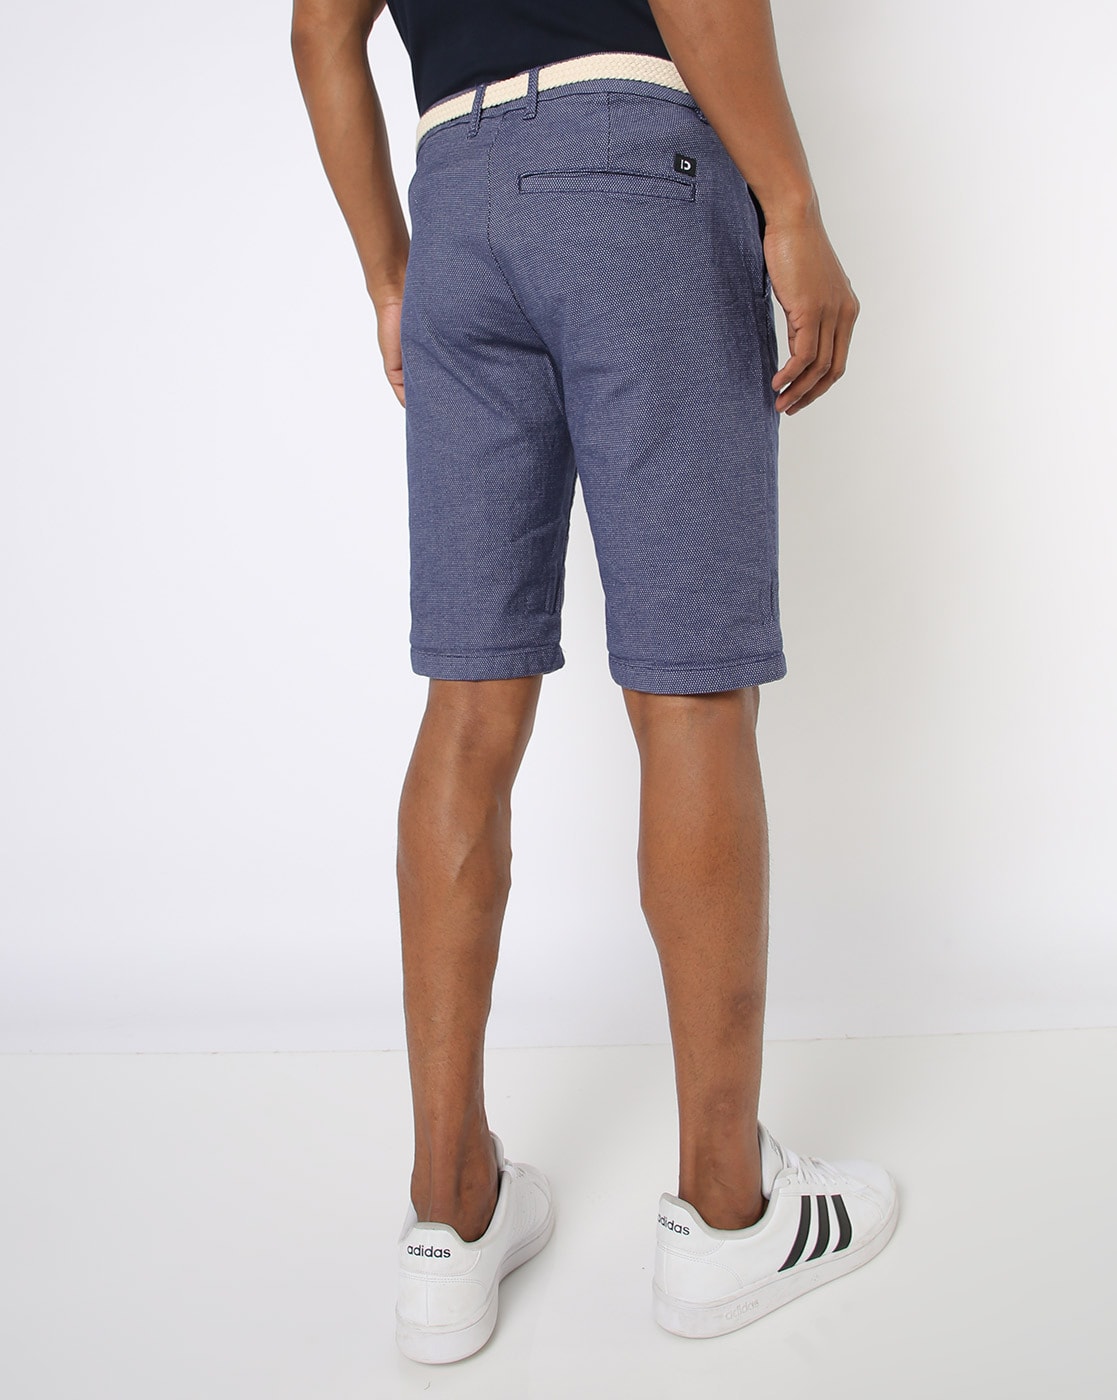 Buy Blue Shorts & Tailor Men for by 3/4ths Tom Online